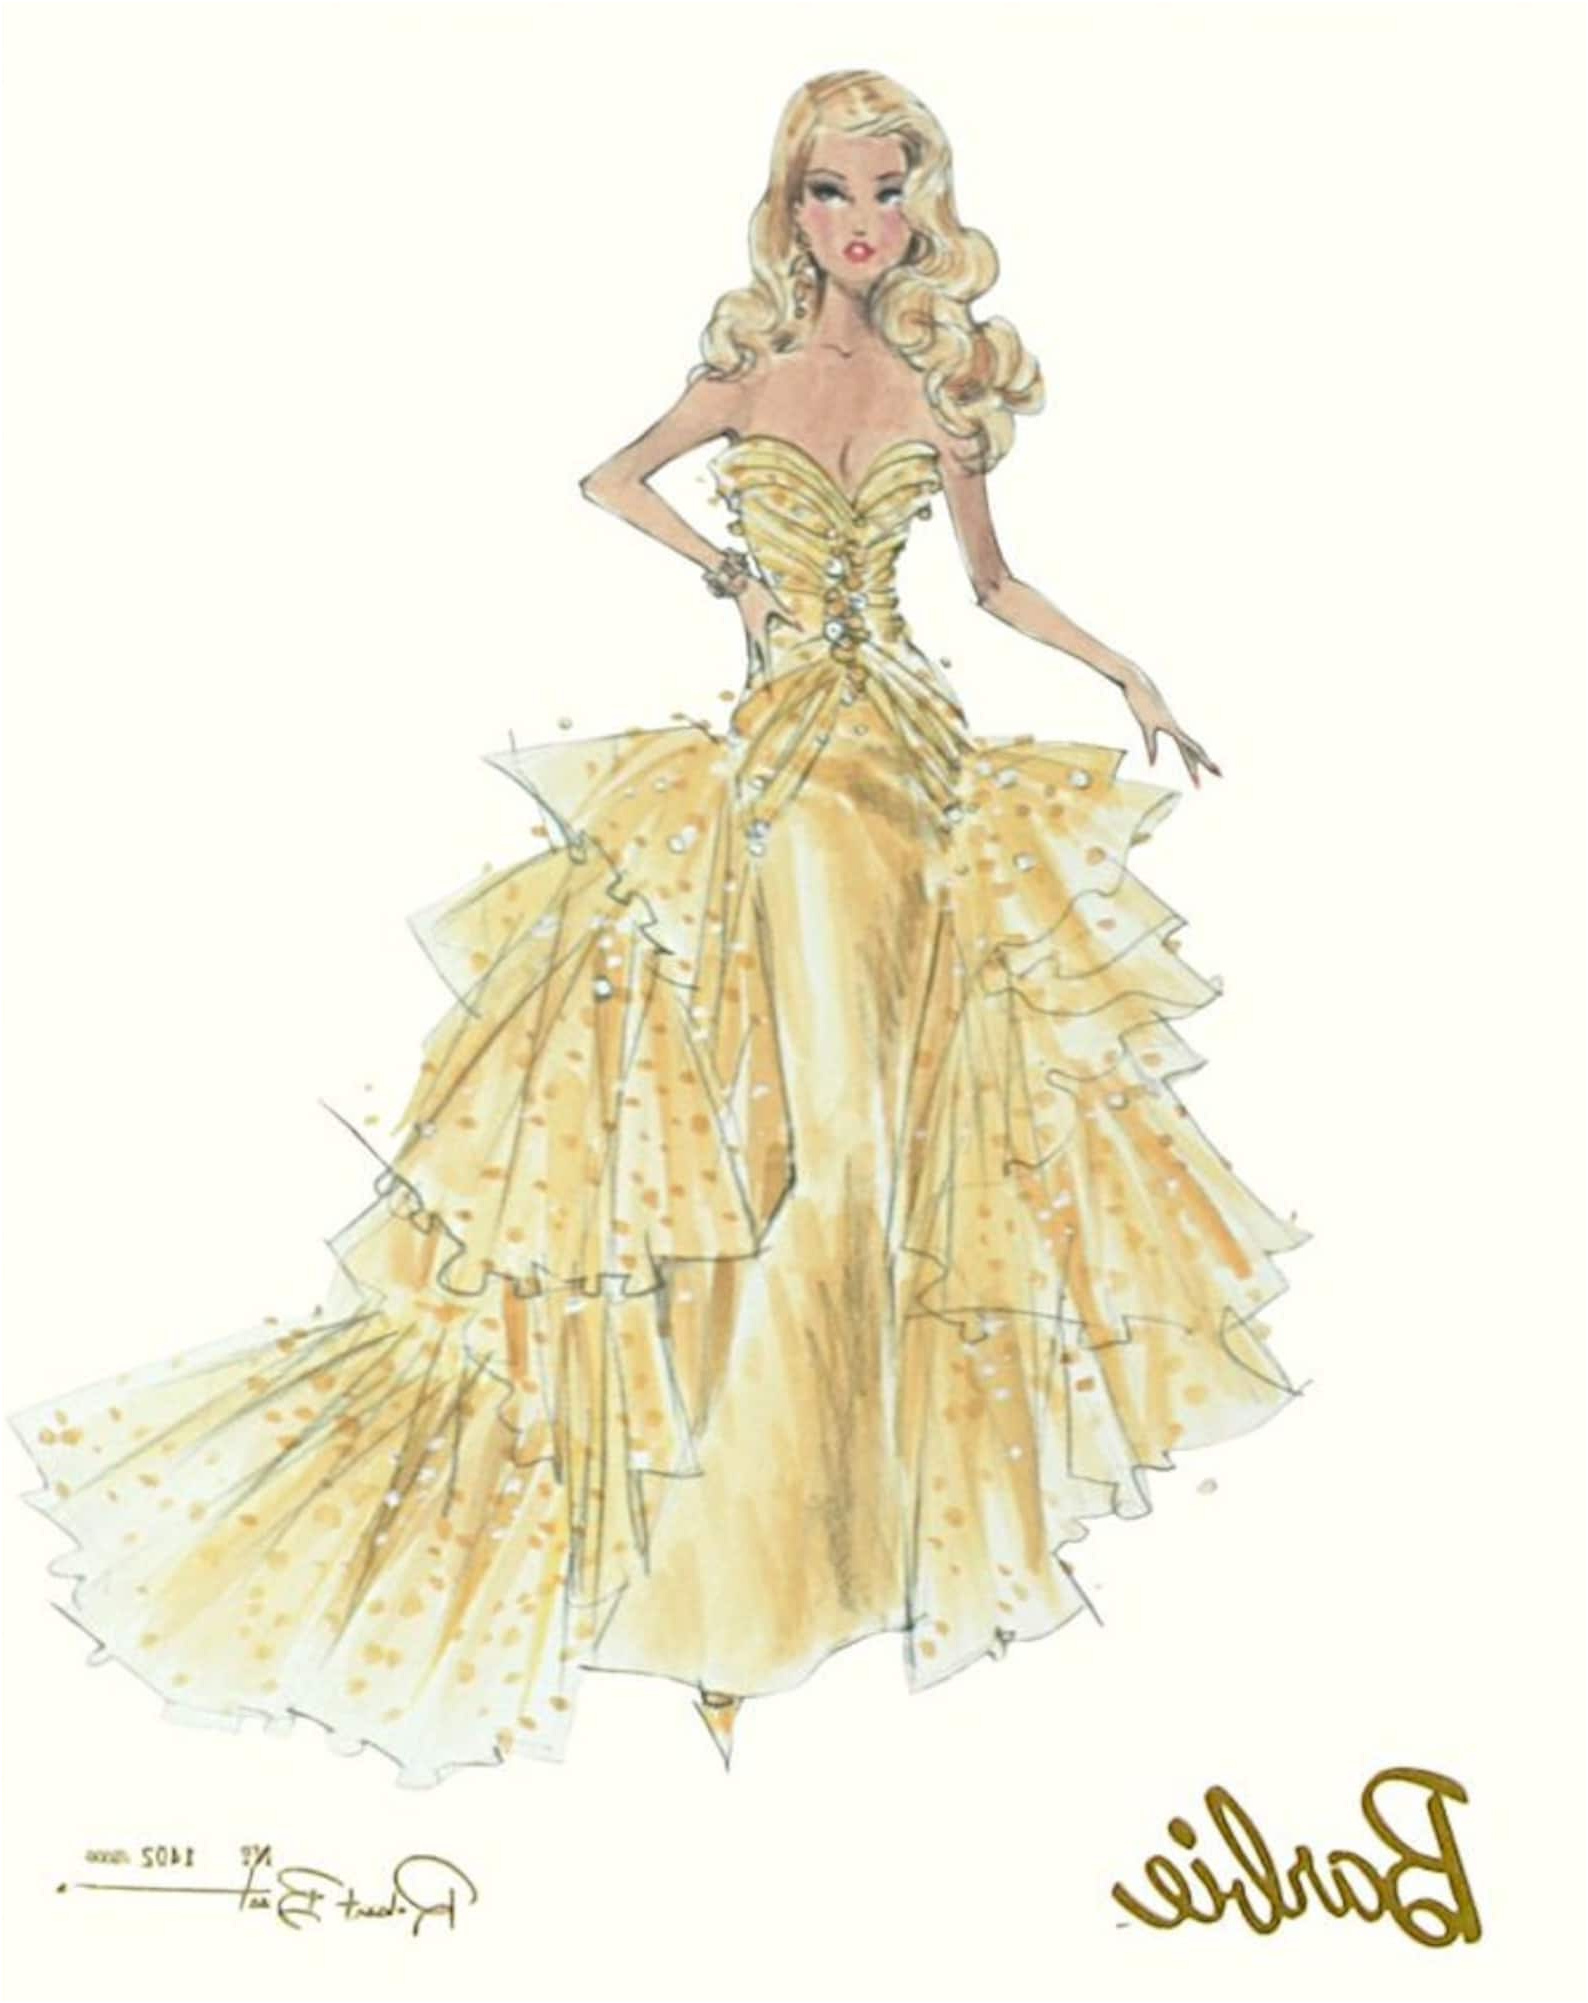 barbie limited 50th anniversary limited click key=d b bfe333ded e5f323 &click sum=2ea &ga order=most relevant&ga search type=all&ga view type=gallery&ga search query=barbie calendar&frs=1